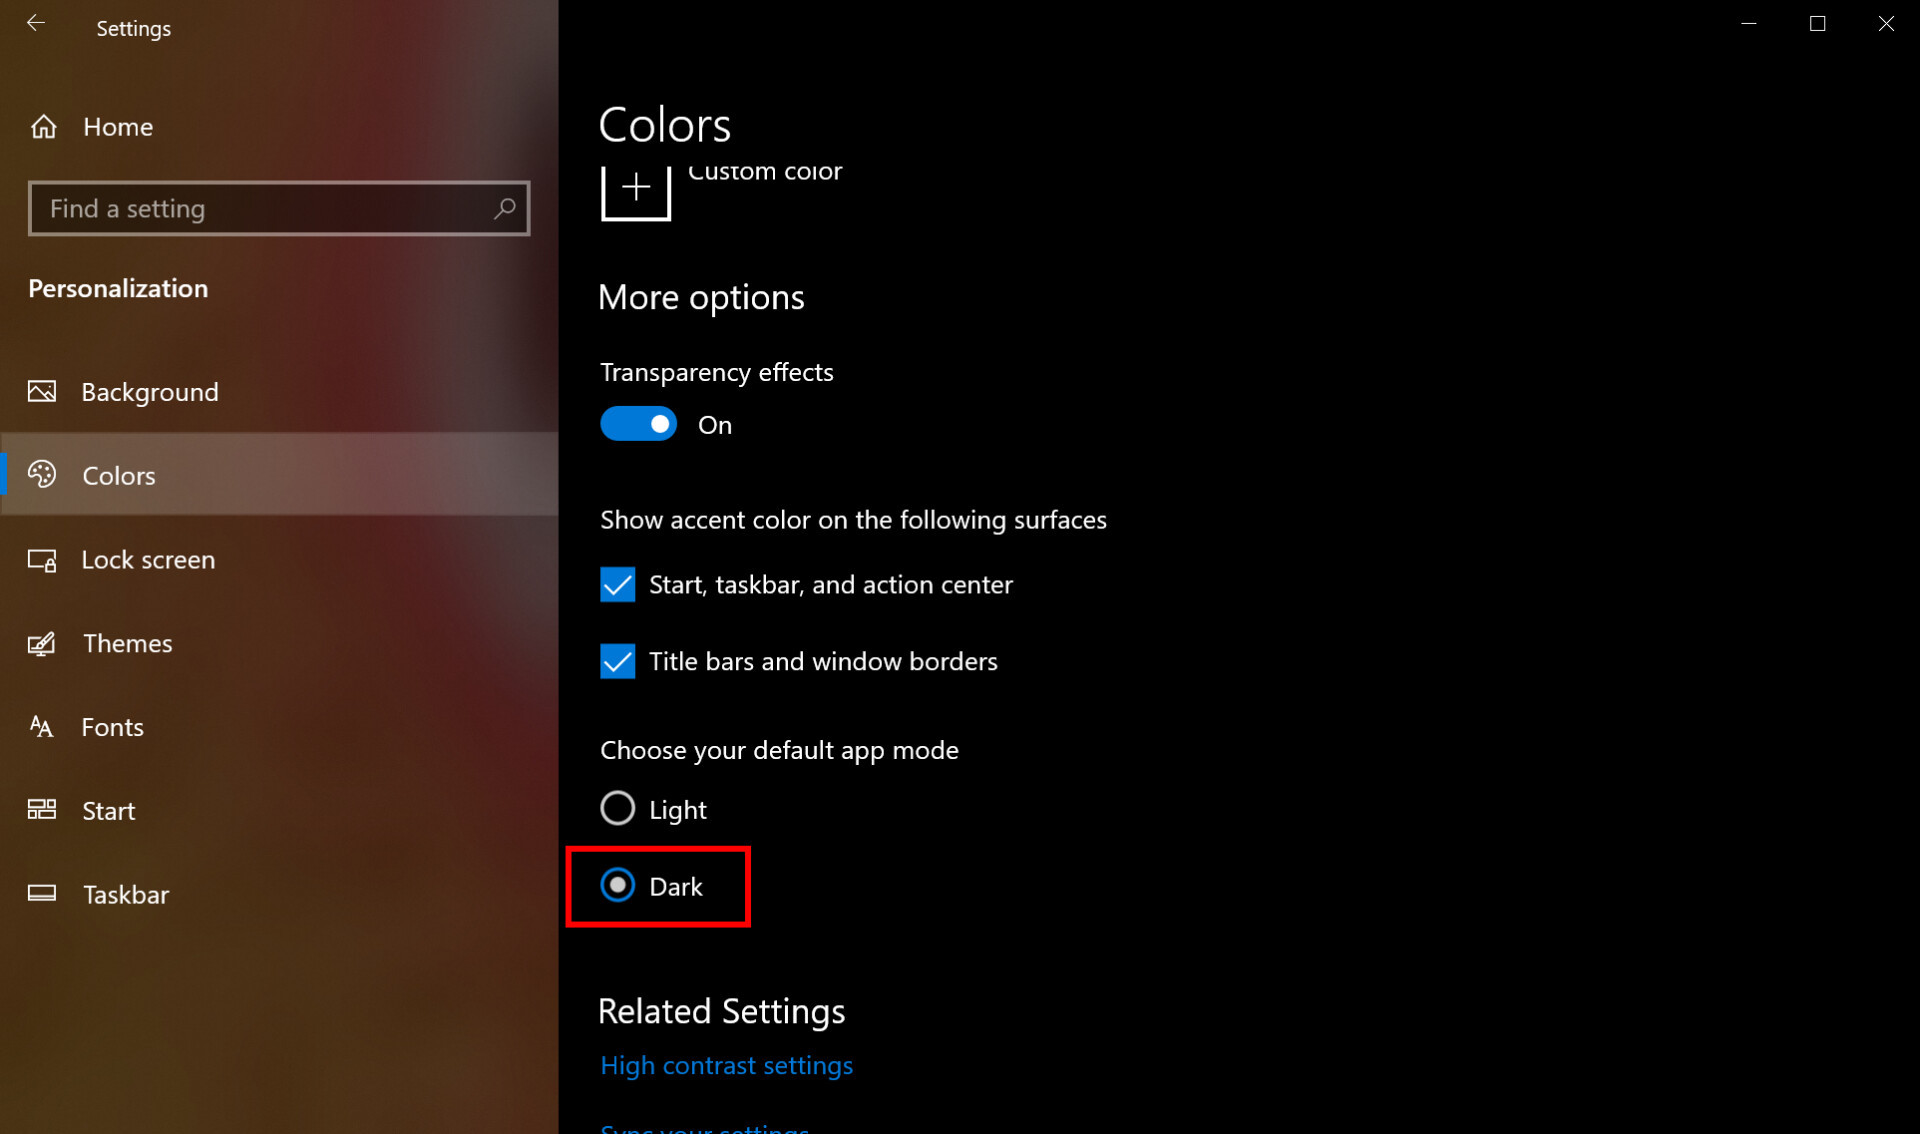 Windows 10 Colors Settings - How to enable dark mode in Windows 10